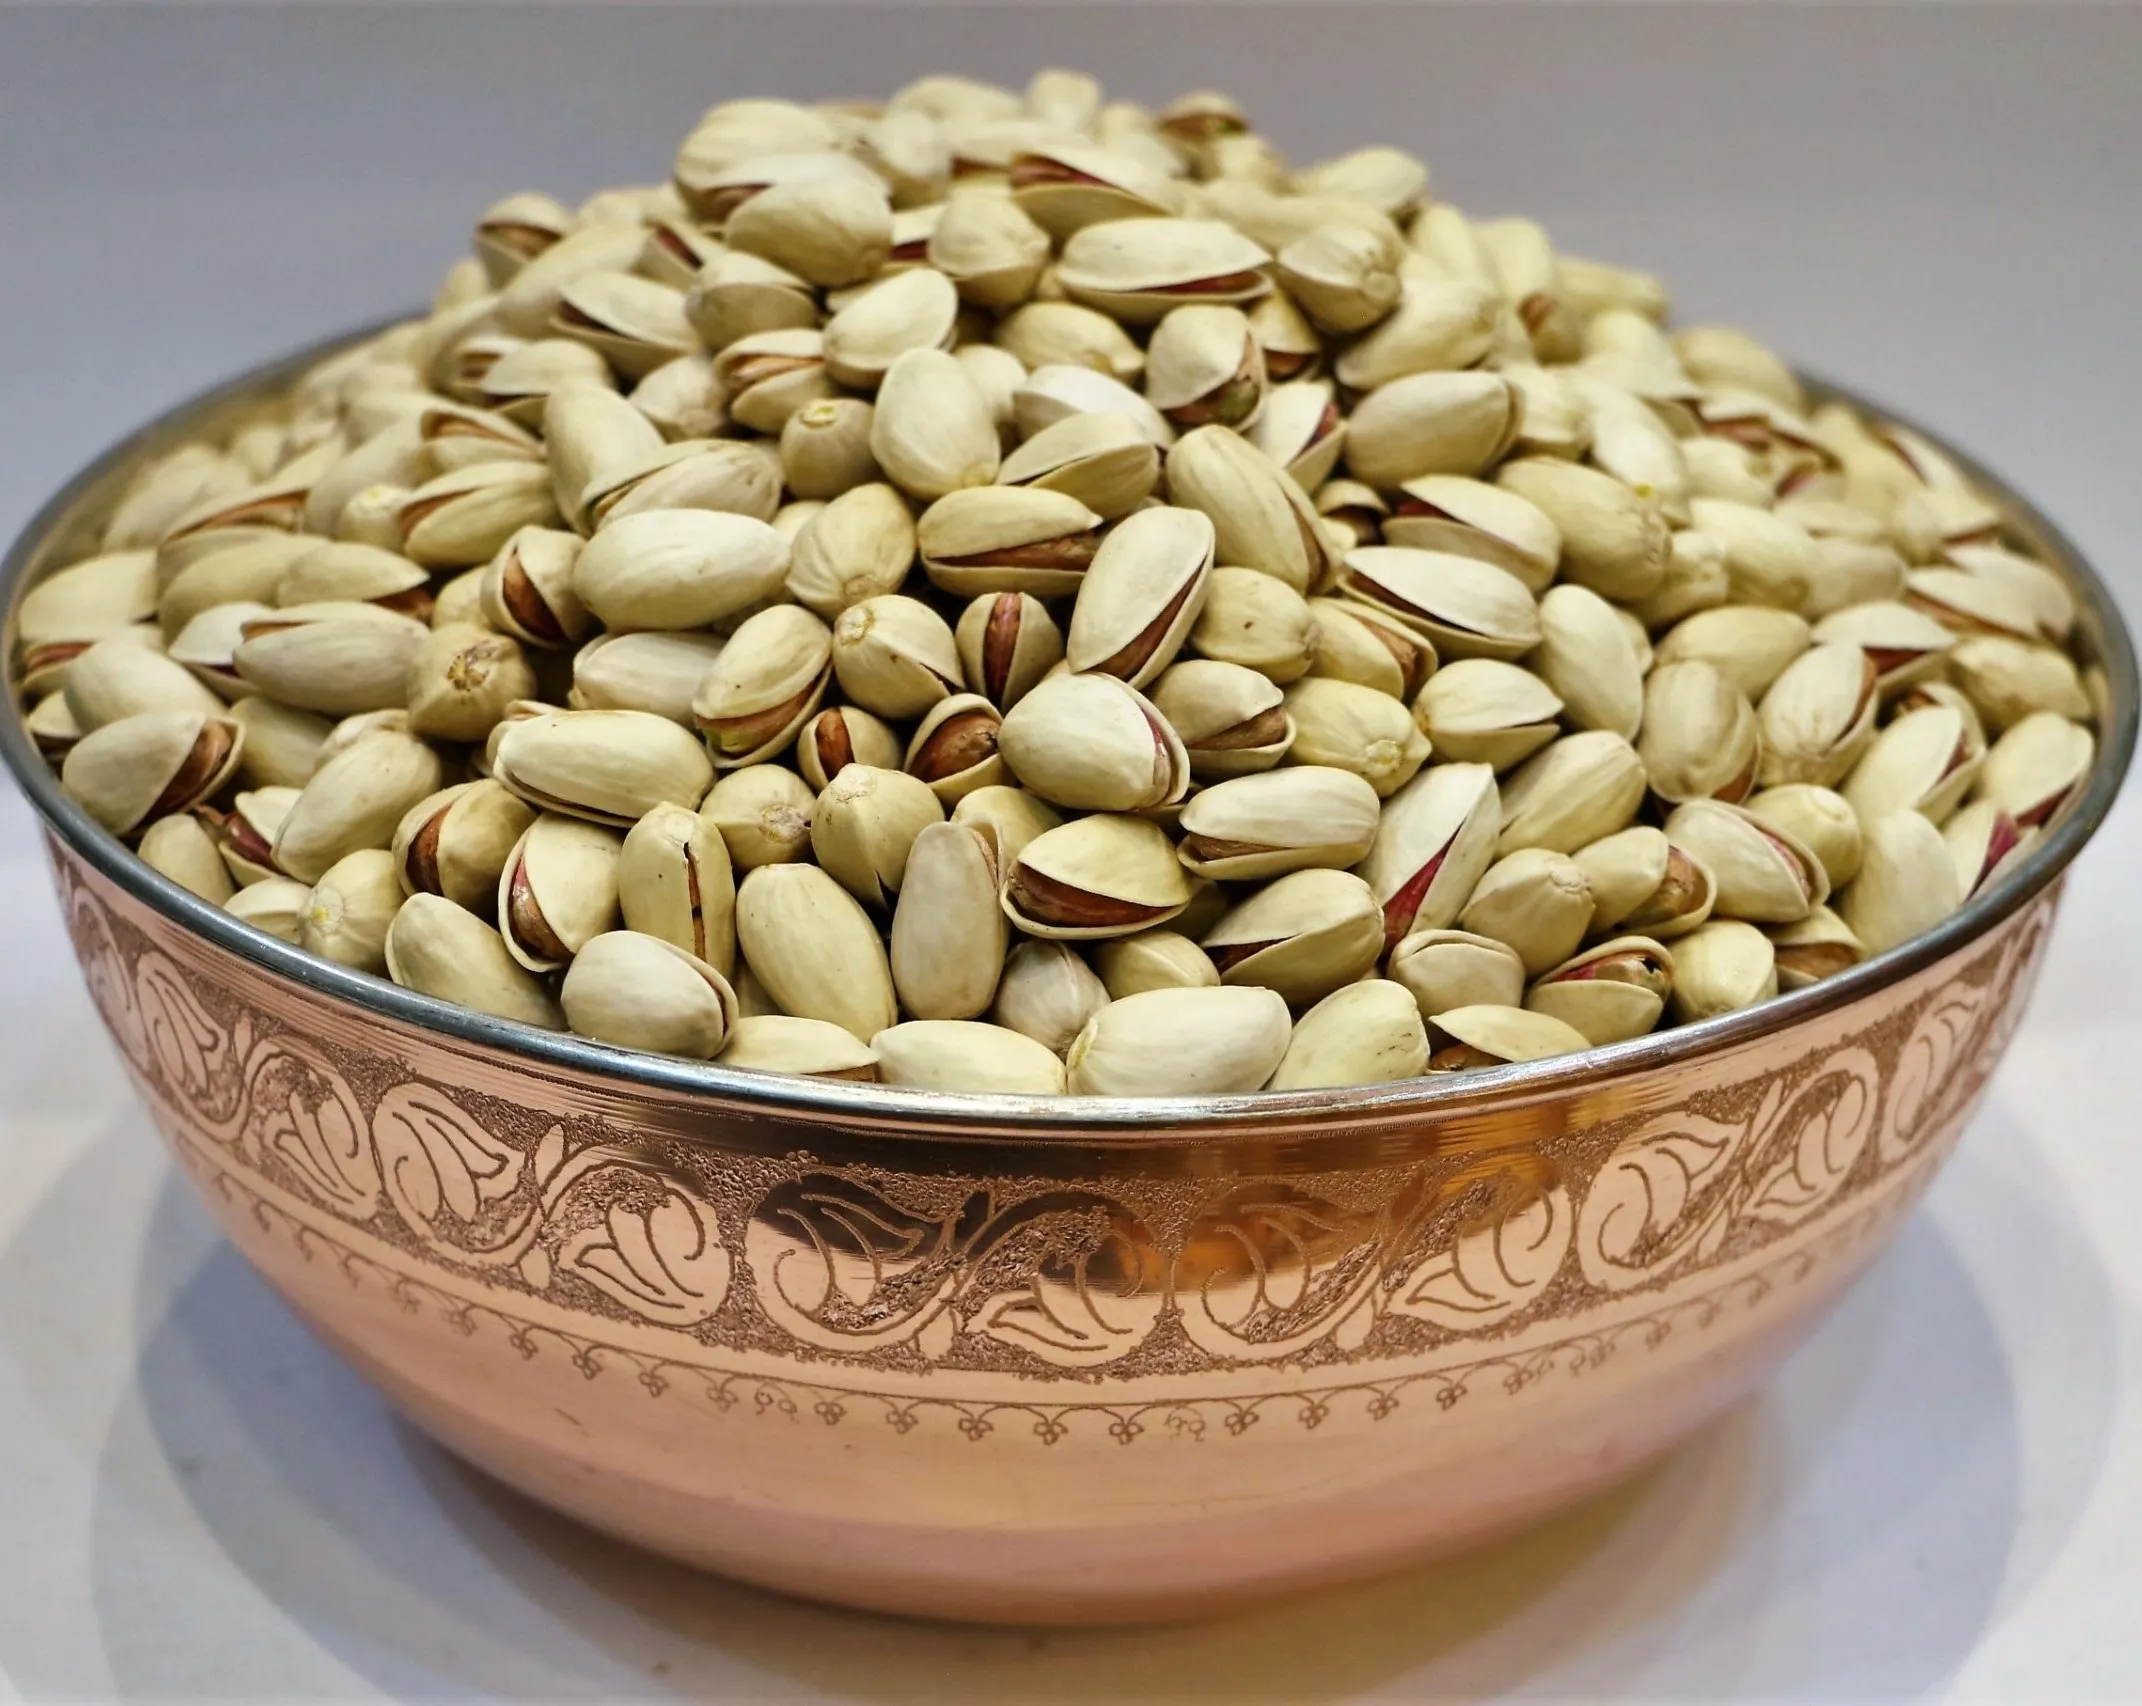 Best bulk pistachios for sale + great purchase price